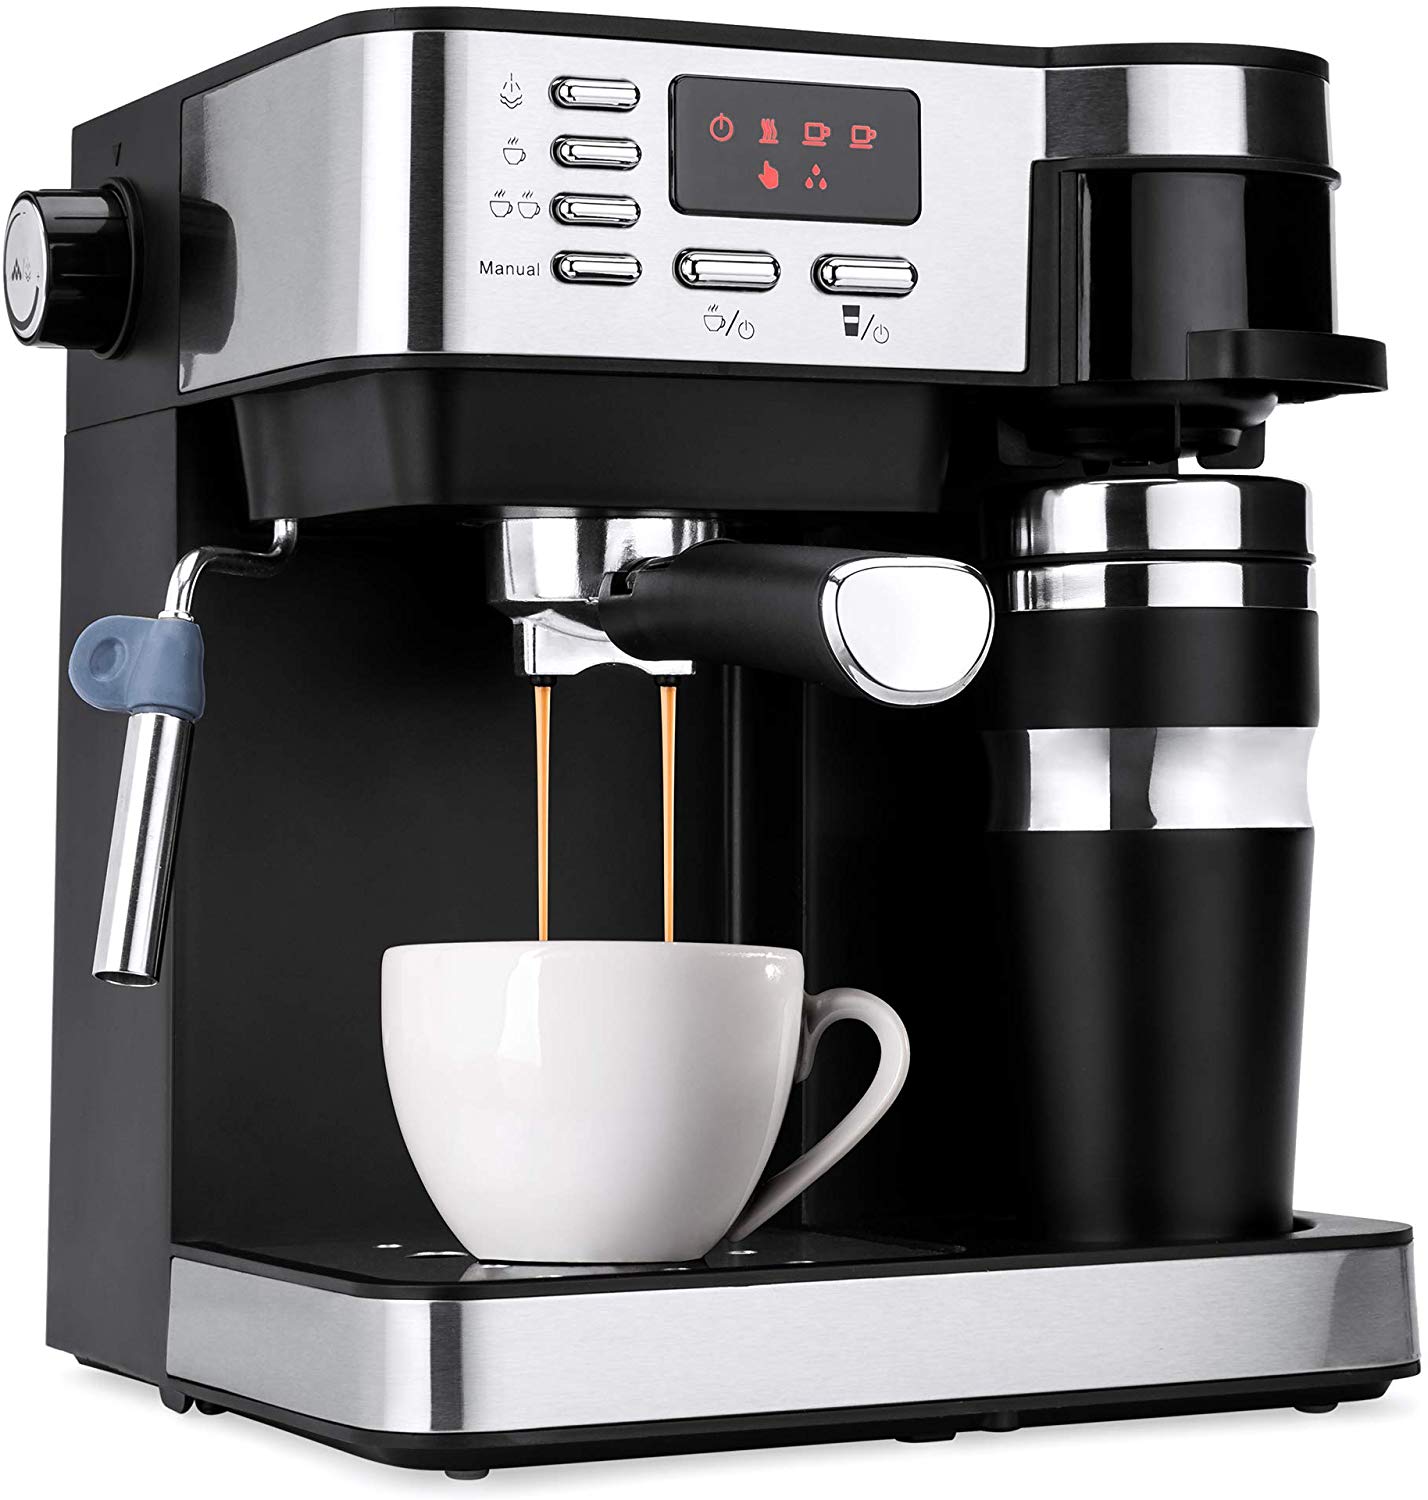 Best Choice Products 3-in-1 15-Bar Espresso, Coffee, and Cappuccino Maker Machine w/Steam Frother, Thermoblock System